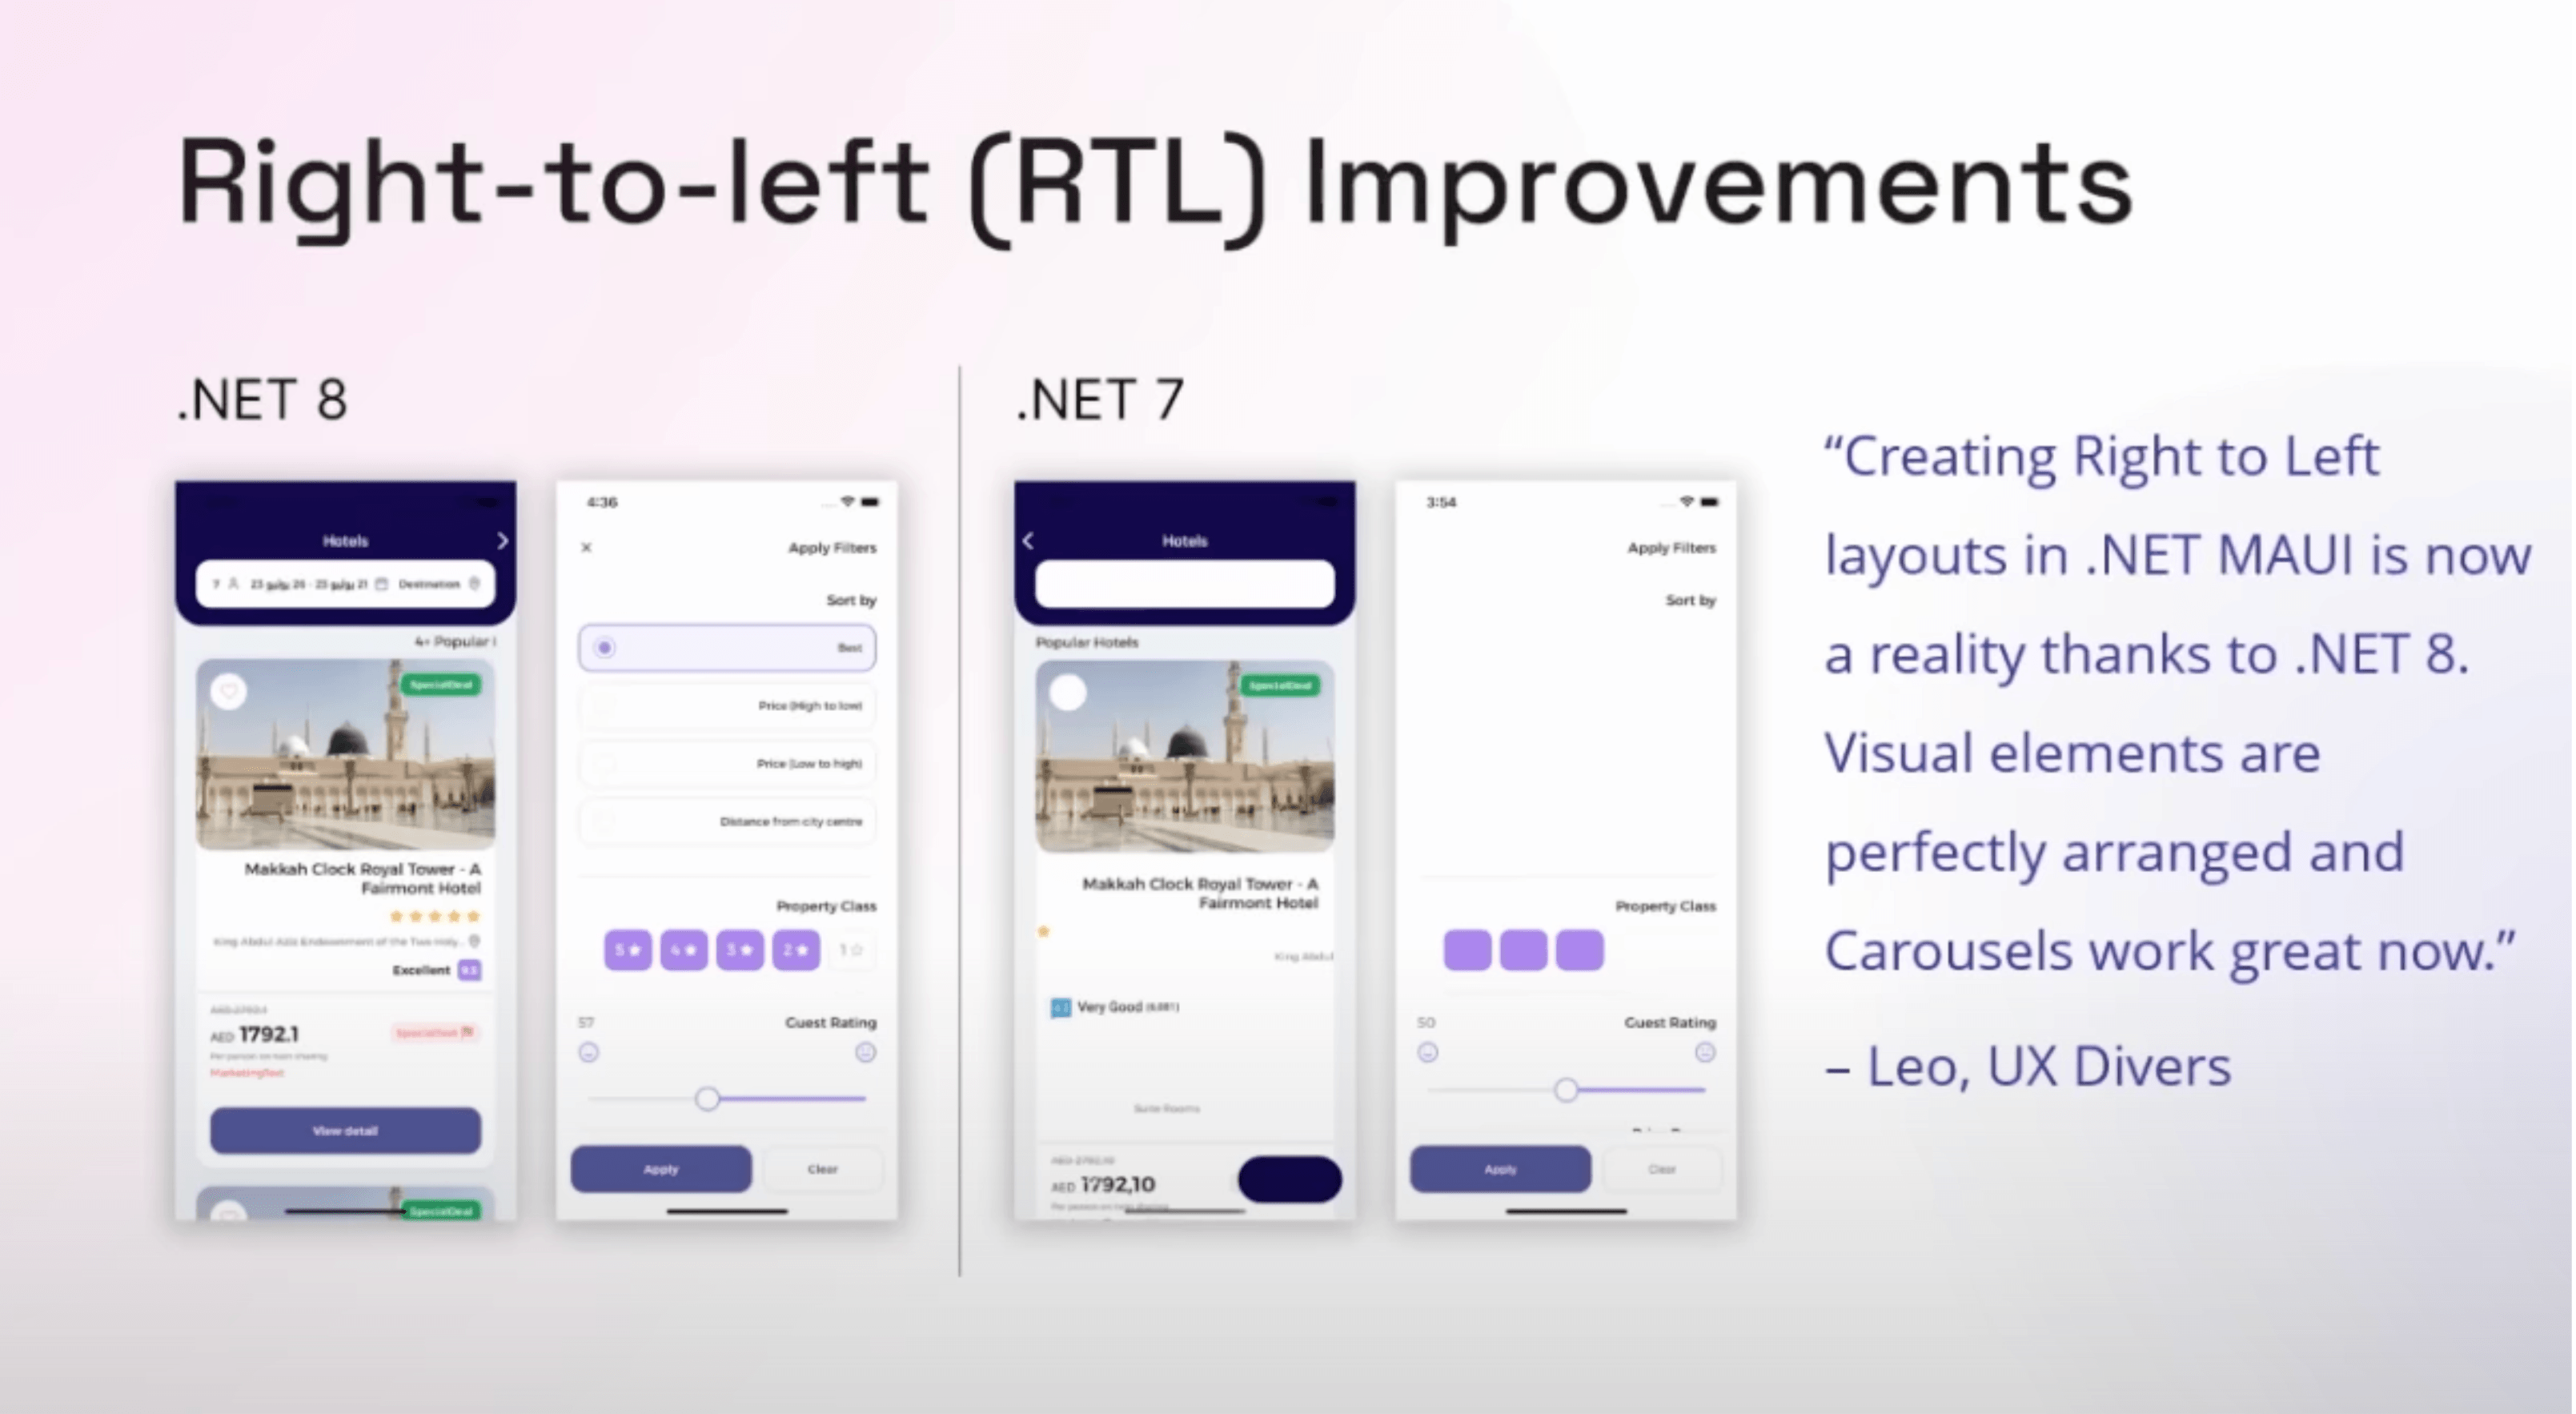 Right-to-left (RTL) Improvements: 'Creating right to left layouts in .NET MAUI is now a reality thanks to .NET 8. Visual elements are perfectly arranged and carousels work great now.' – Leo, UX Divers